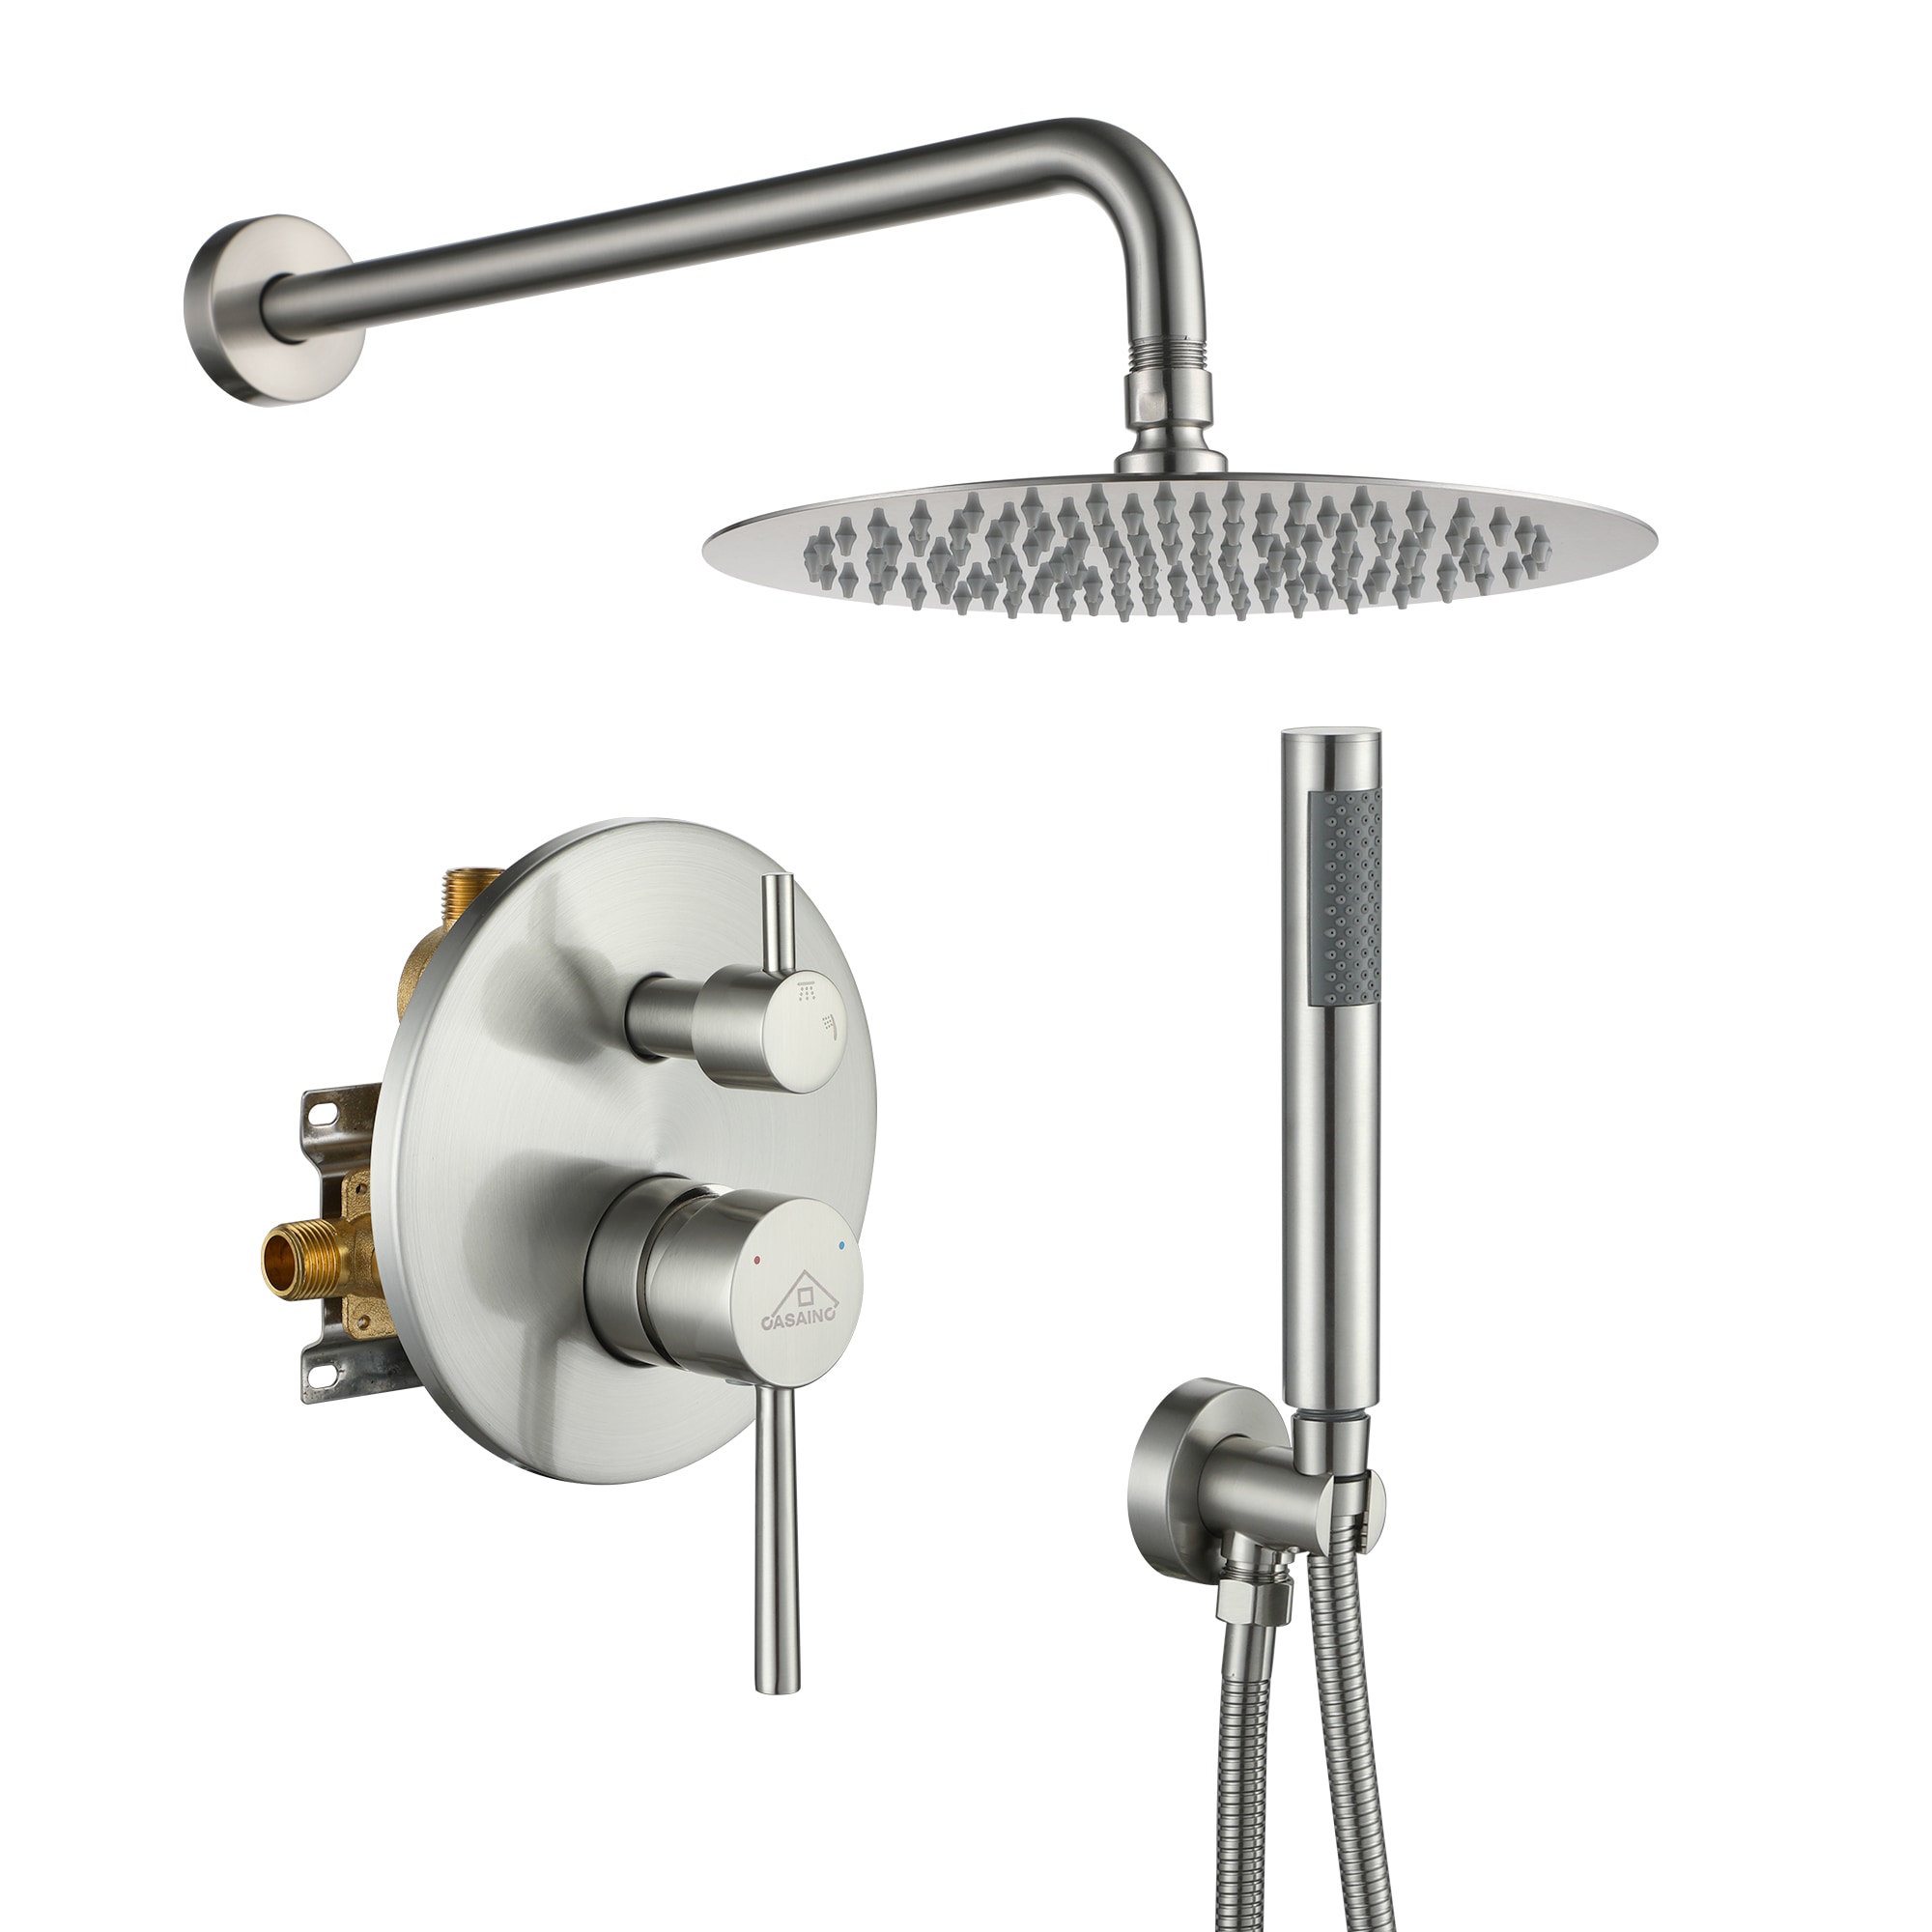 CASAINC Brushed Nickel Built-In Shower Faucet System with 2-way Diverter Pressure-balanced Valve Included